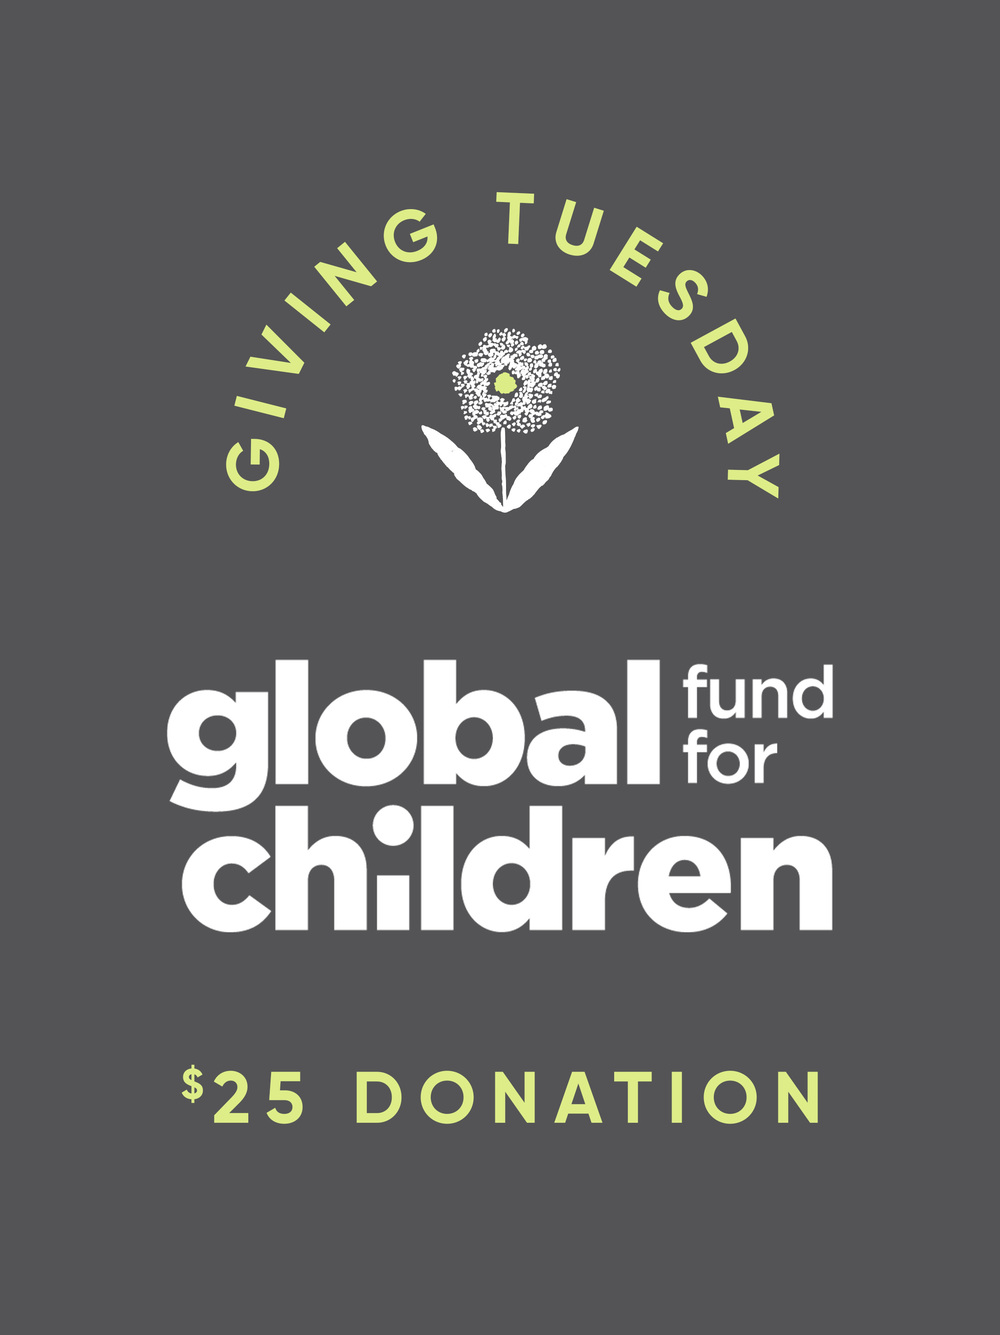 Donate $25 to Global Fund for Children